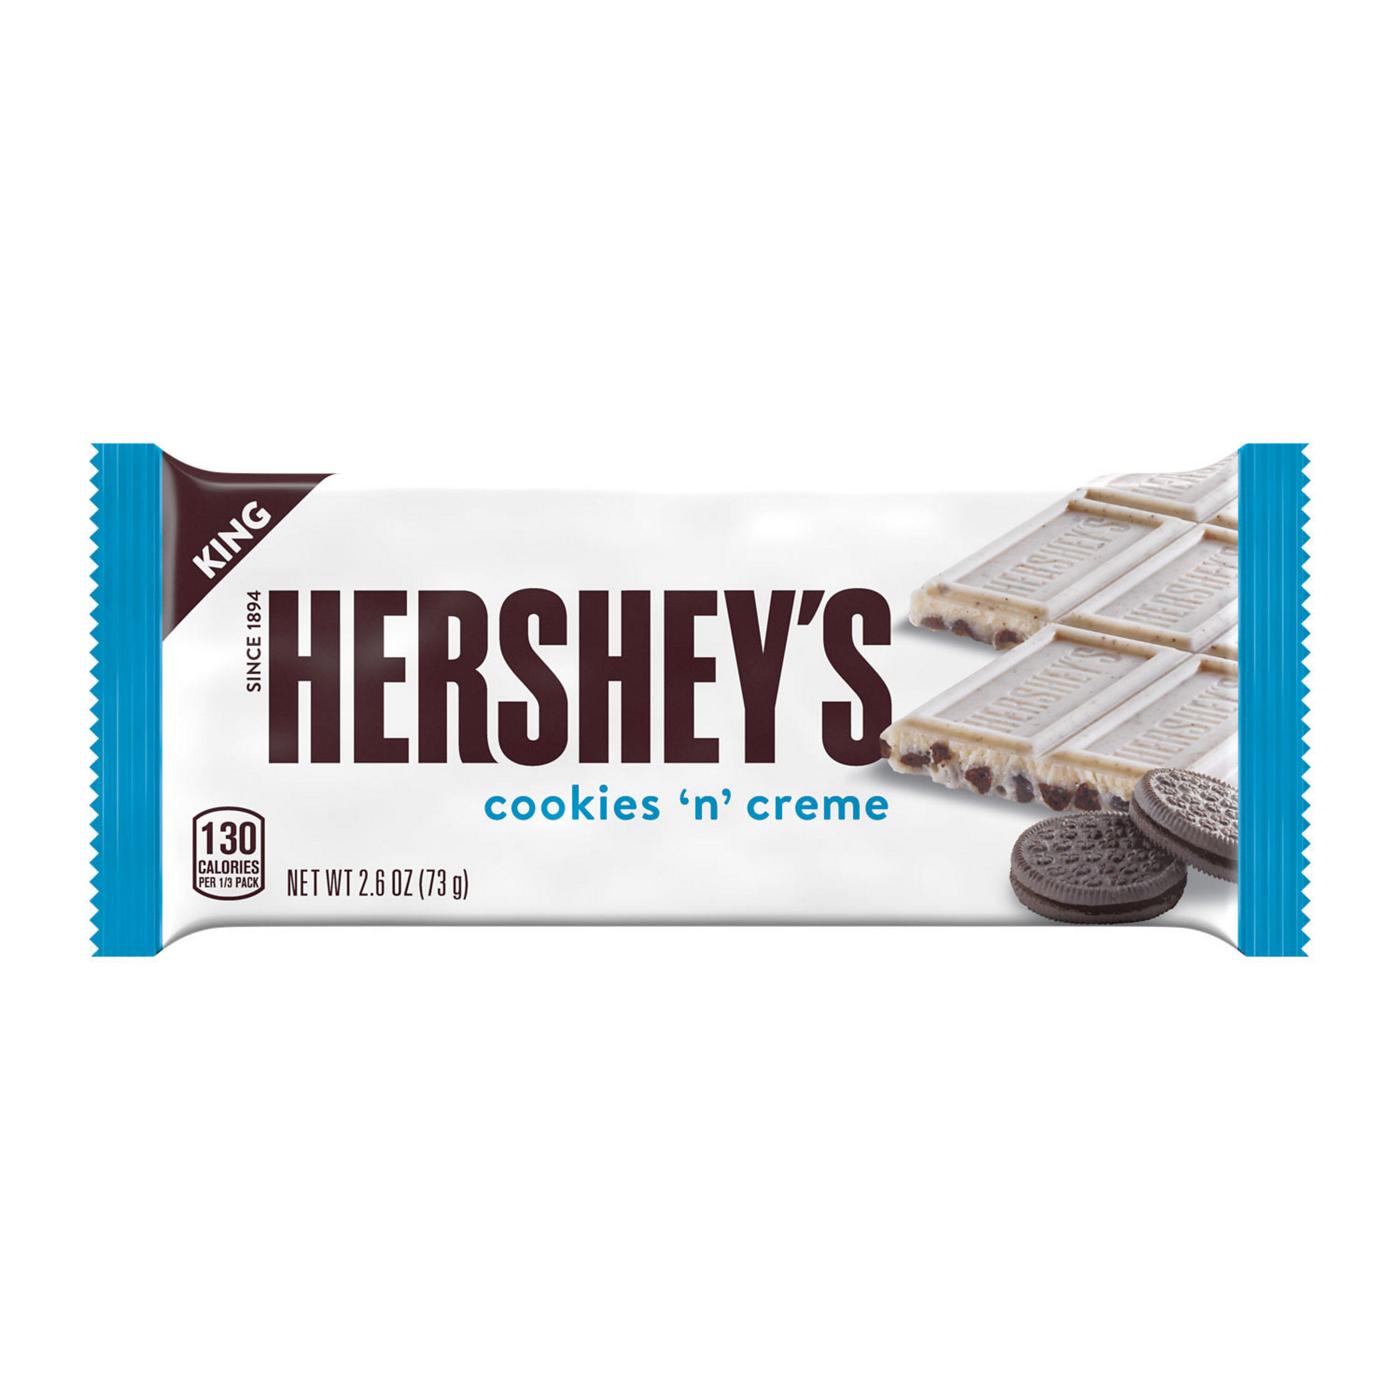 Hershey's Cookies 'n' Creme Candy Bar - King Size; image 1 of 7